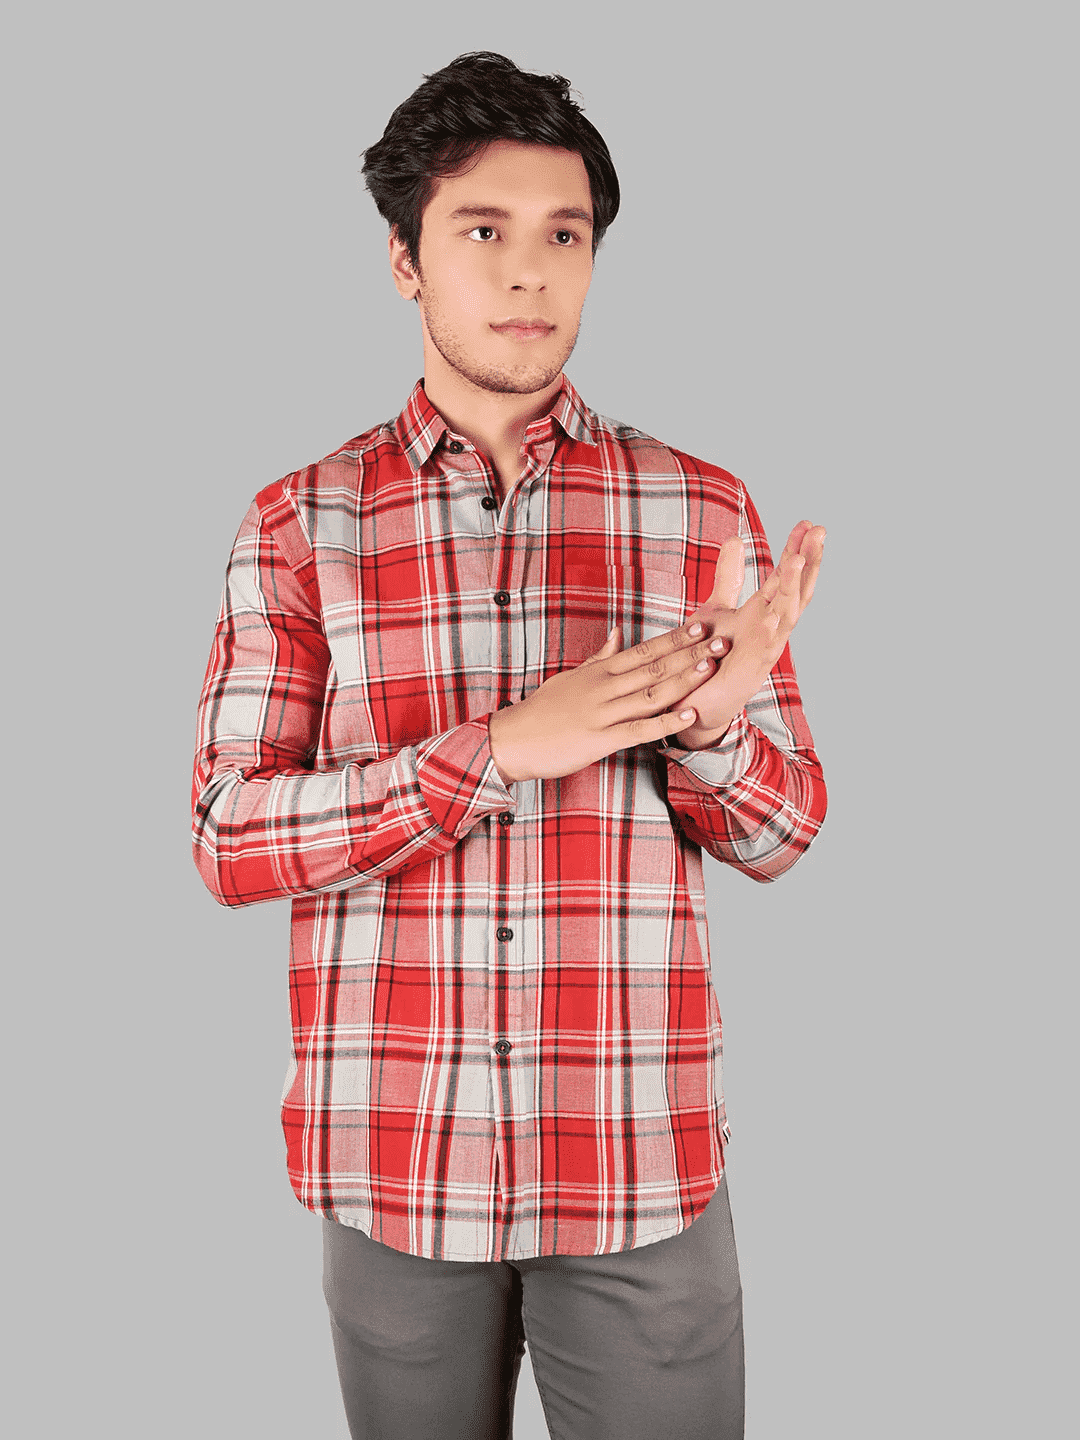 Shop Best Quality Mens Shirt Online in India